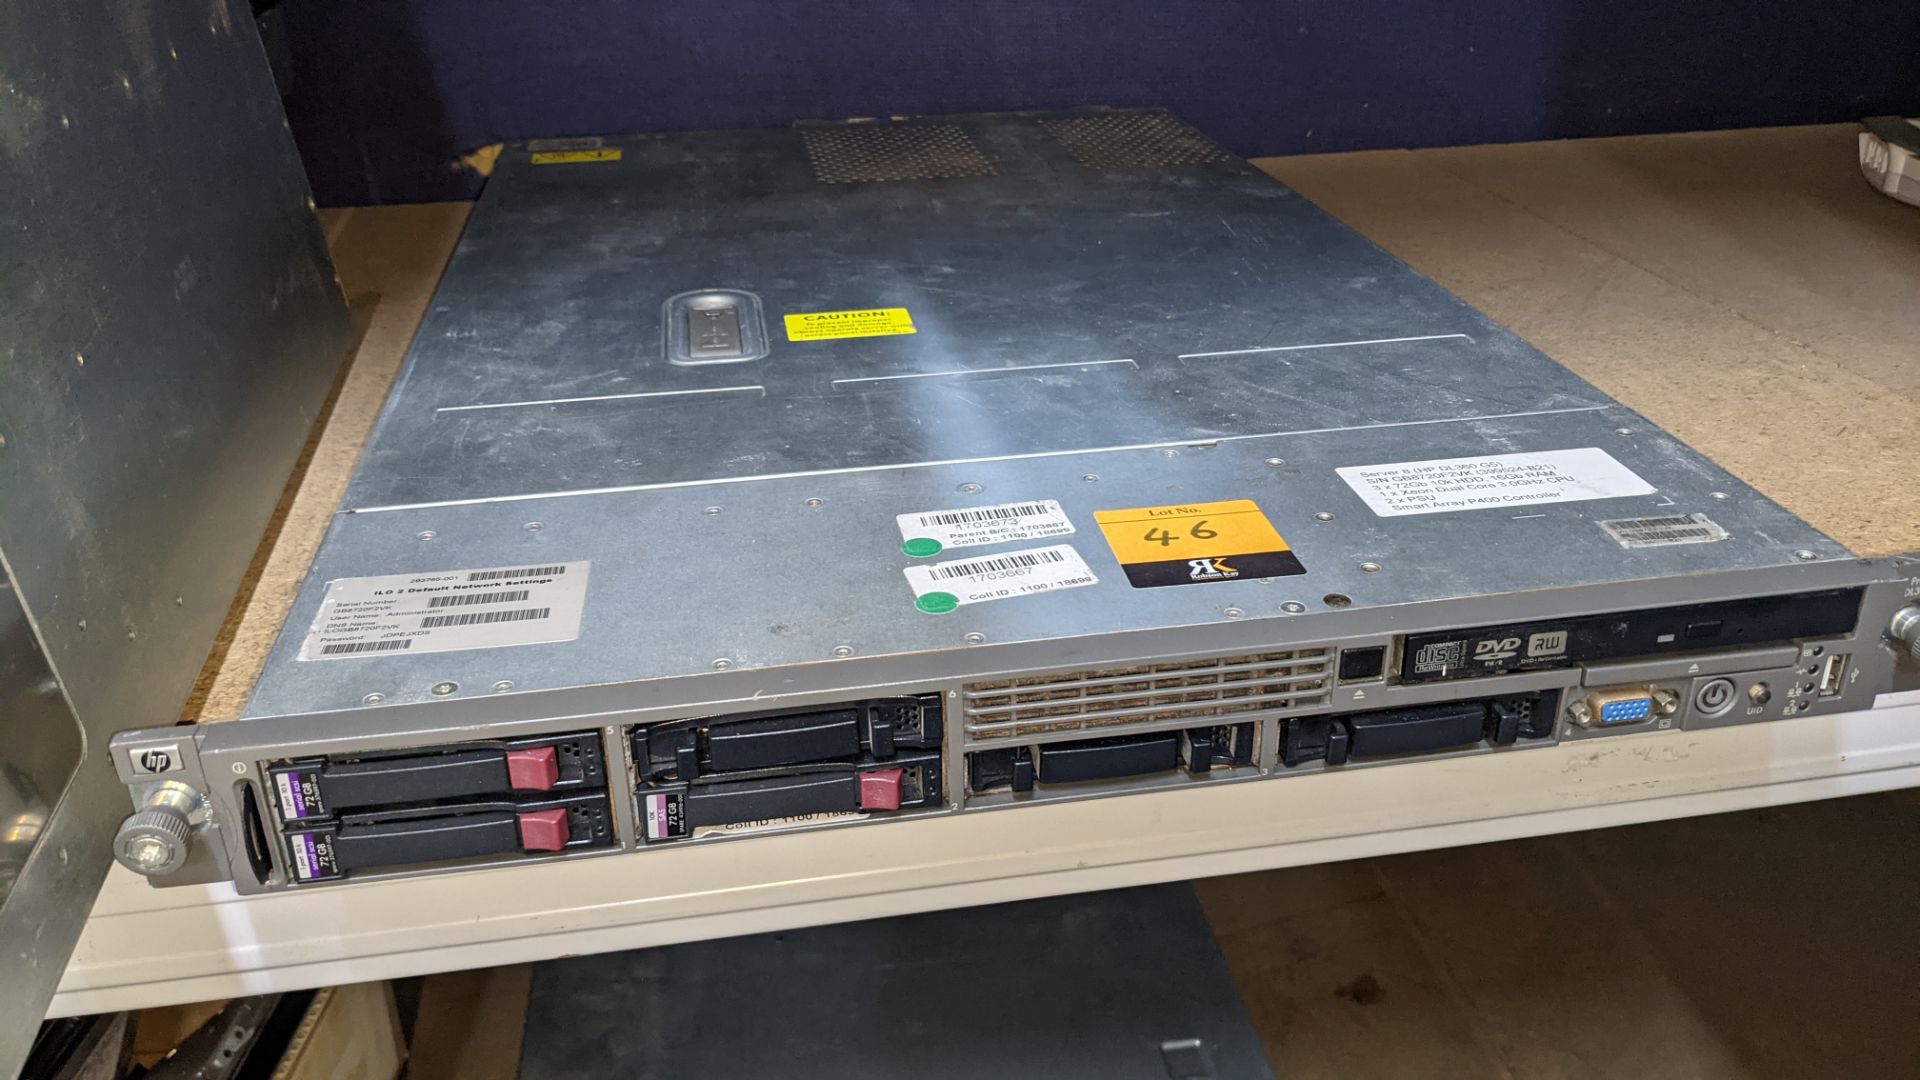 HP DL360 G5 server with Xeon Dual Core 3GHz processor, 2 off PSU, Smart Array P400 controller, 16GB